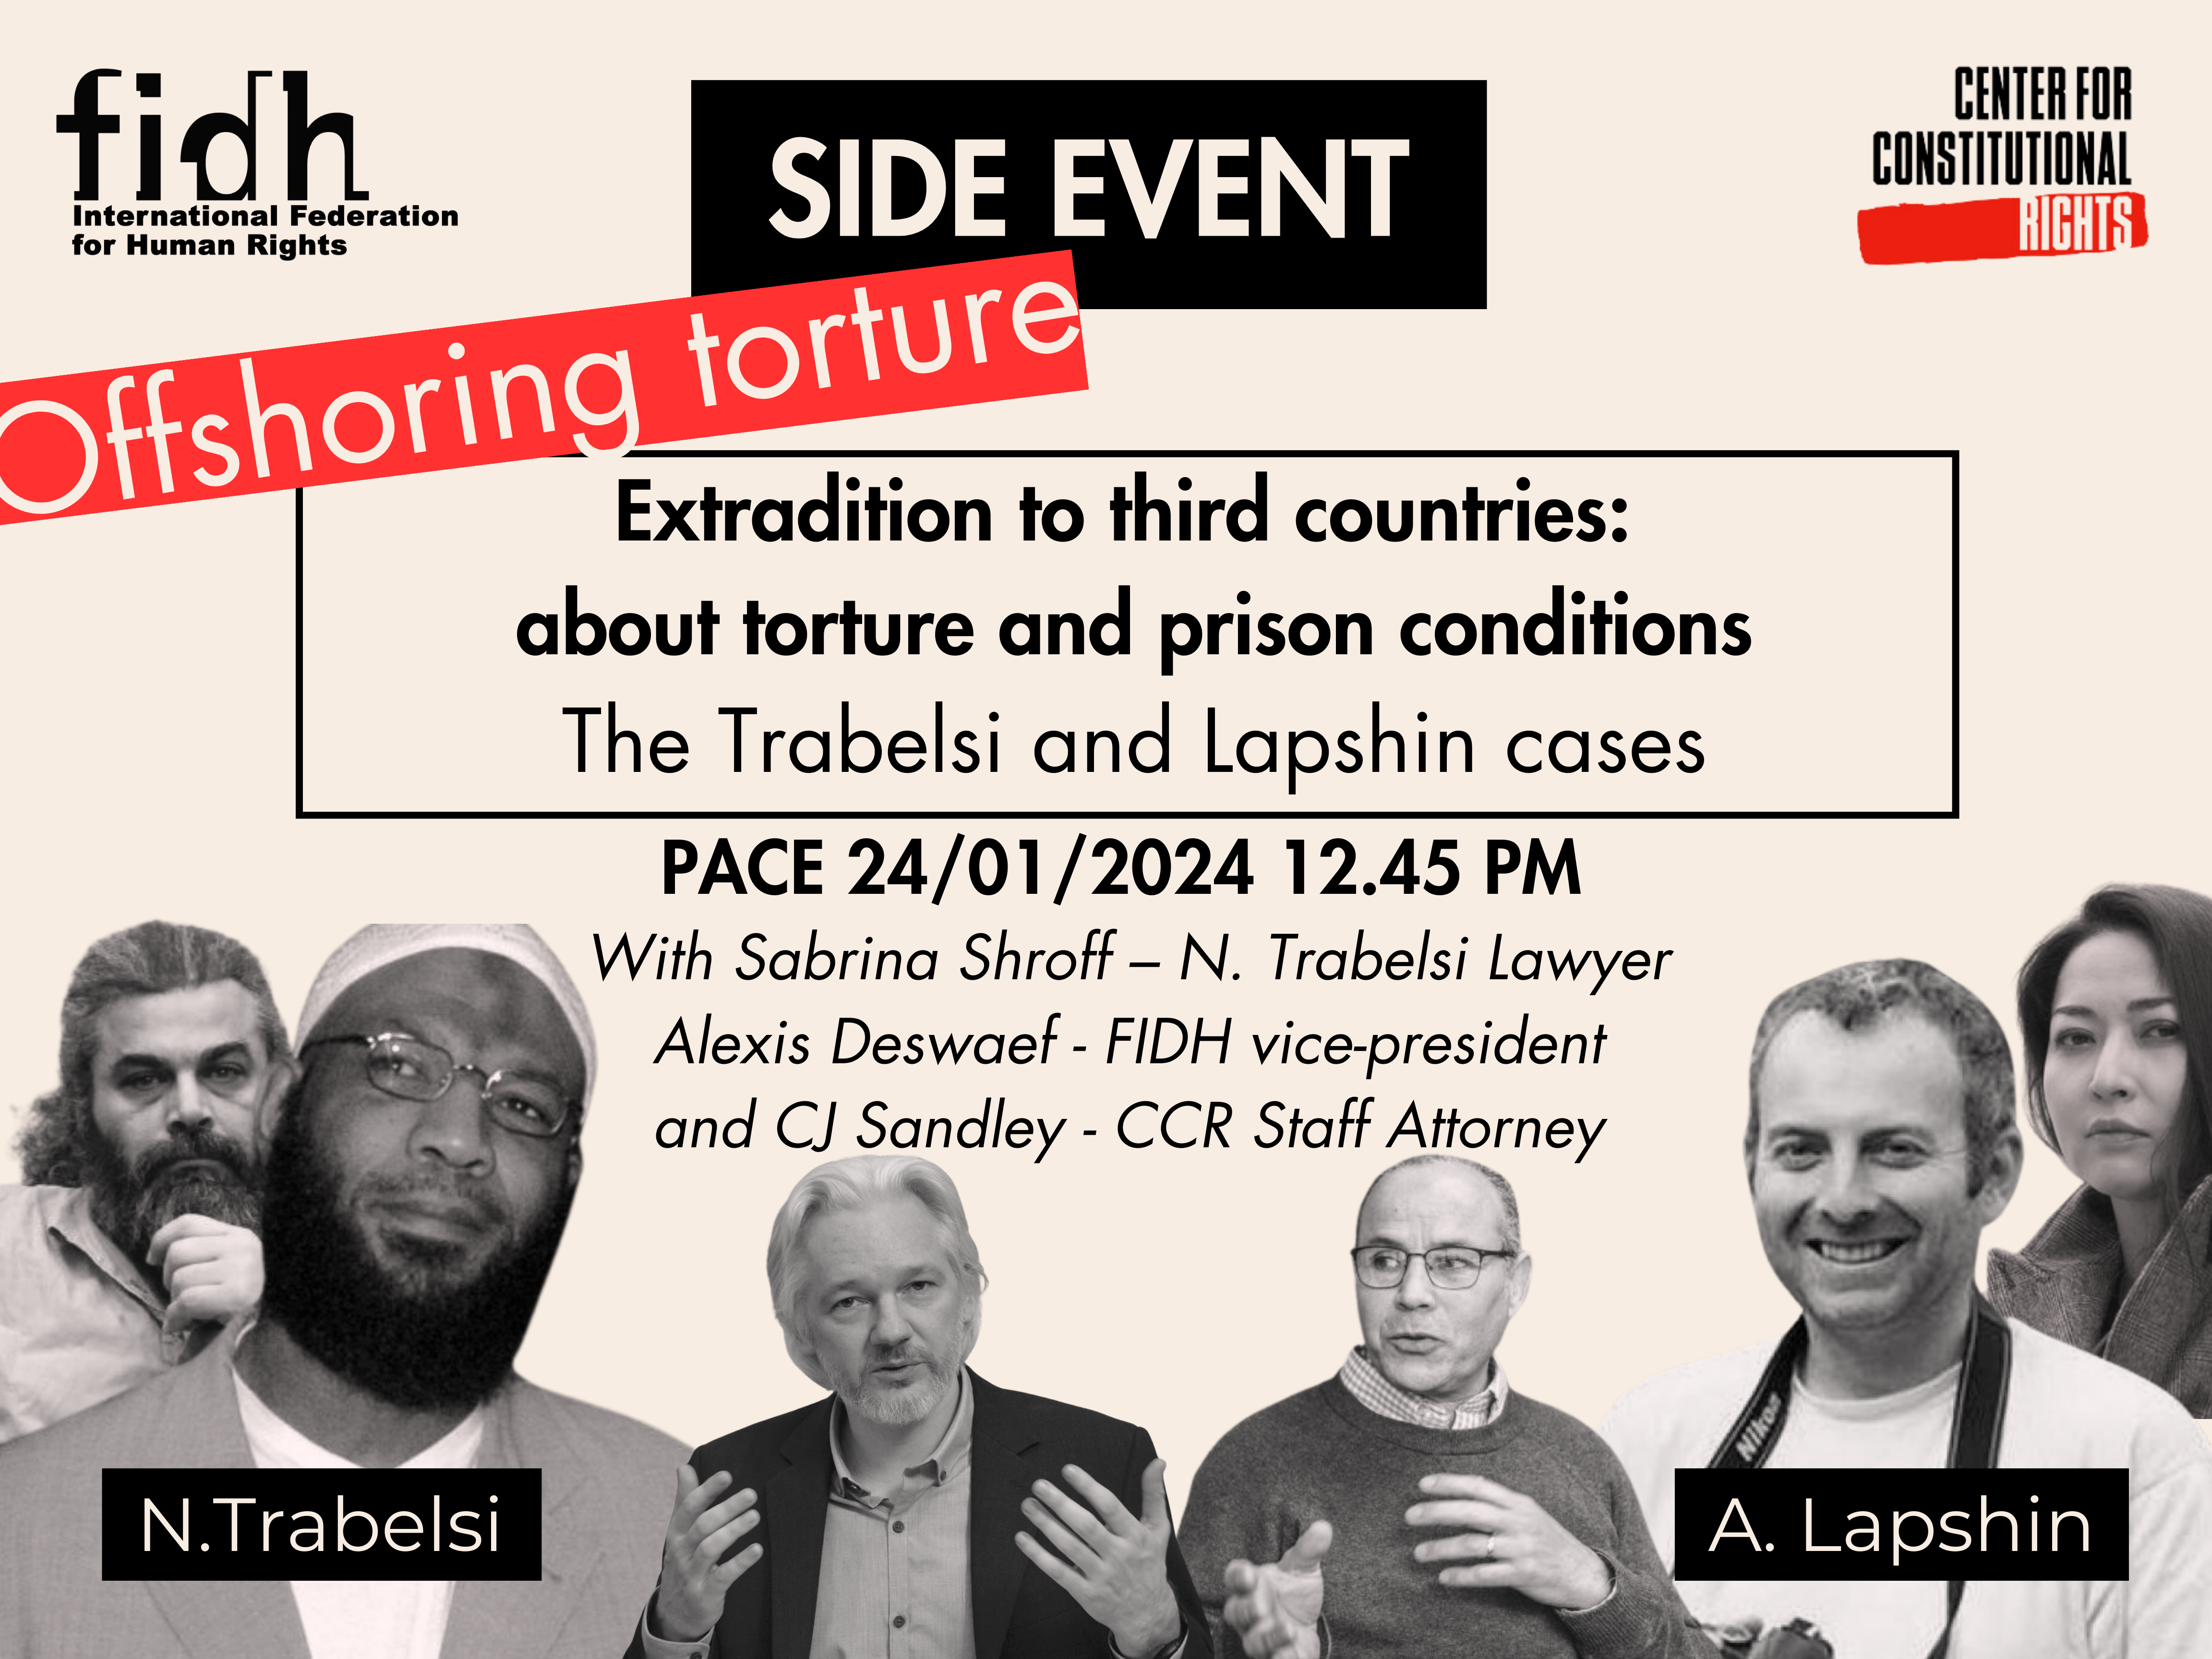 Off-white background. Logo of FIDH in top left corner, CCR logo in top right corner. Side Event. Offshoring Torture. Extradition to Third Countries: about torture and prison conditions. The Trabelsi and Lapshin cases. PACE 12/01/2024 12.45 PM. With Sabrina Shroff - N. Tabelsi Lawyer. Alexis Deswaef - FIDH vice-president and CJ Sandley - CCR Staff Attorney. Black and white images of N. Trabelsi and A. Lapshin.